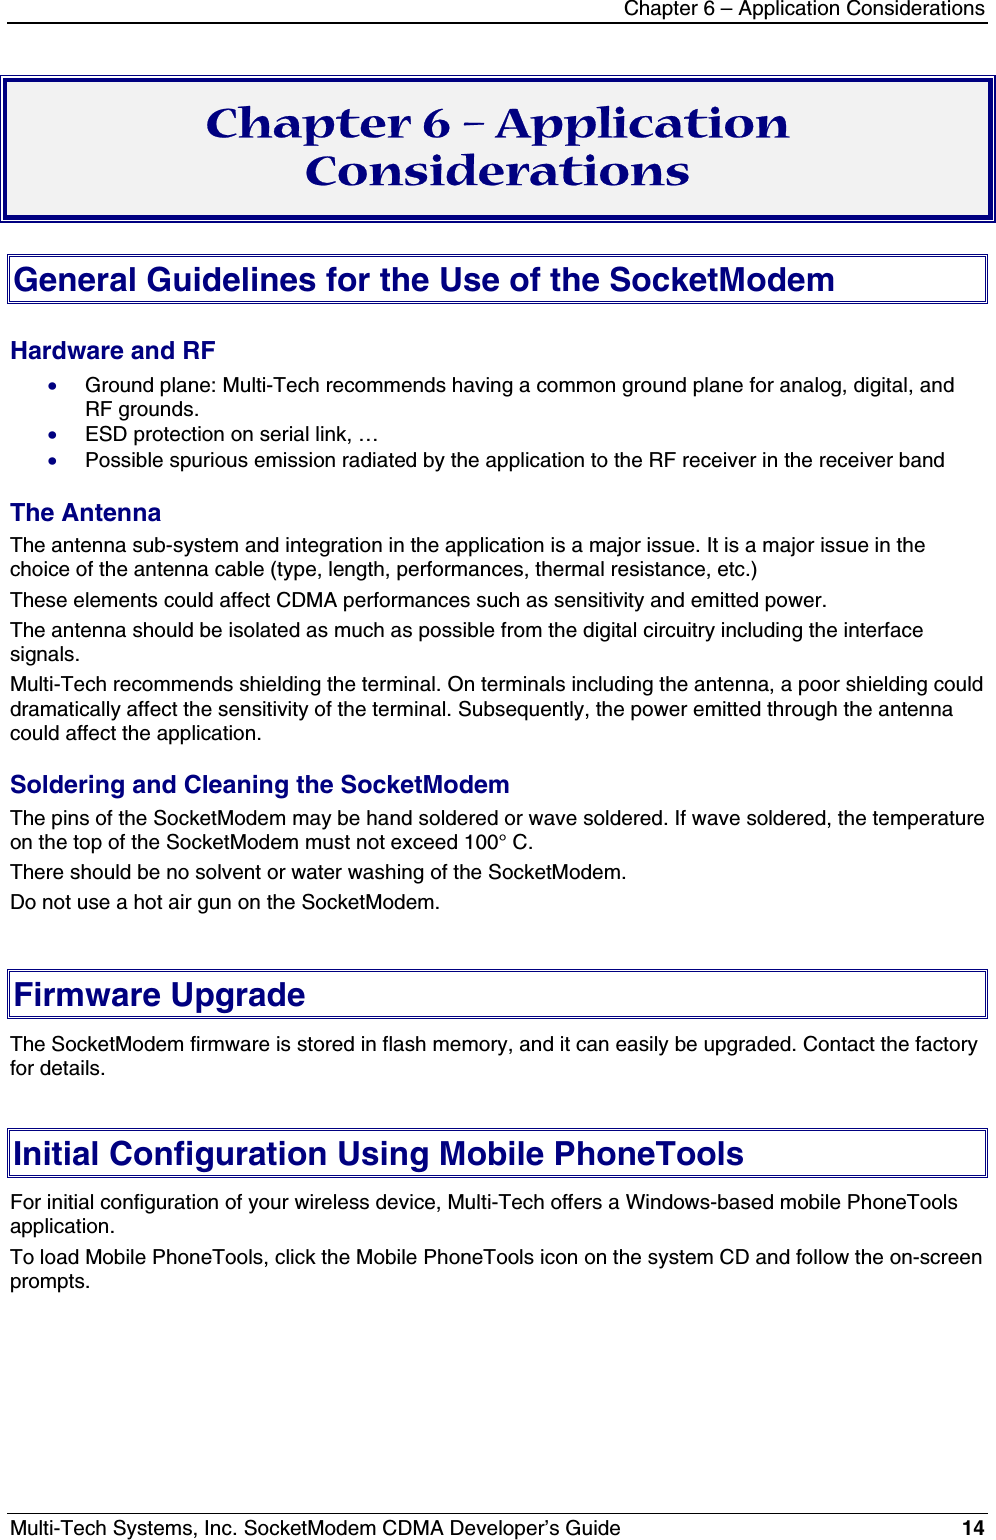 Chapter 6 – Application ConsiderationsMulti-Tech Systems, Inc. SocketModem CDMA Developer’s Guide 14Chapter 6 – ApplicationConsiderationsGeneral Guidelines for the Use of the SocketModemHardware and RF· Ground plane: Multi-Tech recommends having a common ground plane for analog, digital, andRF grounds.· ESD protection on serial link, …· Possible spurious emission radiated by the application to the RF receiver in the receiver bandThe AntennaThe antenna sub-system and integration in the application is a major issue. It is a major issue in thechoice of the antenna cable (type, length, performances, thermal resistance, etc.)These elements could affect CDMA performances such as sensitivity and emitted power.The antenna should be isolated as much as possible from the digital circuitry including the interfacesignals.Multi-Tech recommends shielding the terminal. On terminals including the antenna, a poor shielding coulddramatically affect the sensitivity of the terminal. Subsequently, the power emitted through the antennacould affect the application.Soldering and Cleaning the SocketModemThe pins of the SocketModem may be hand soldered or wave soldered. If wave soldered, the temperatureon the top of the SocketModem must not exceed 100° C.There should be no solvent or water washing of the SocketModem.Do not use a hot air gun on the SocketModem.Firmware UpgradeThe SocketModem firmware is stored in flash memory, and it can easily be upgraded. Contact the factoryfor details.Initial Configuration Using Mobile PhoneToolsFor initial configuration of your wireless device, Multi-Tech offers a Windows-based mobile PhoneToolsapplication.To load Mobile PhoneTools, click the Mobile PhoneTools icon on the system CD and follow the on-screenprompts.